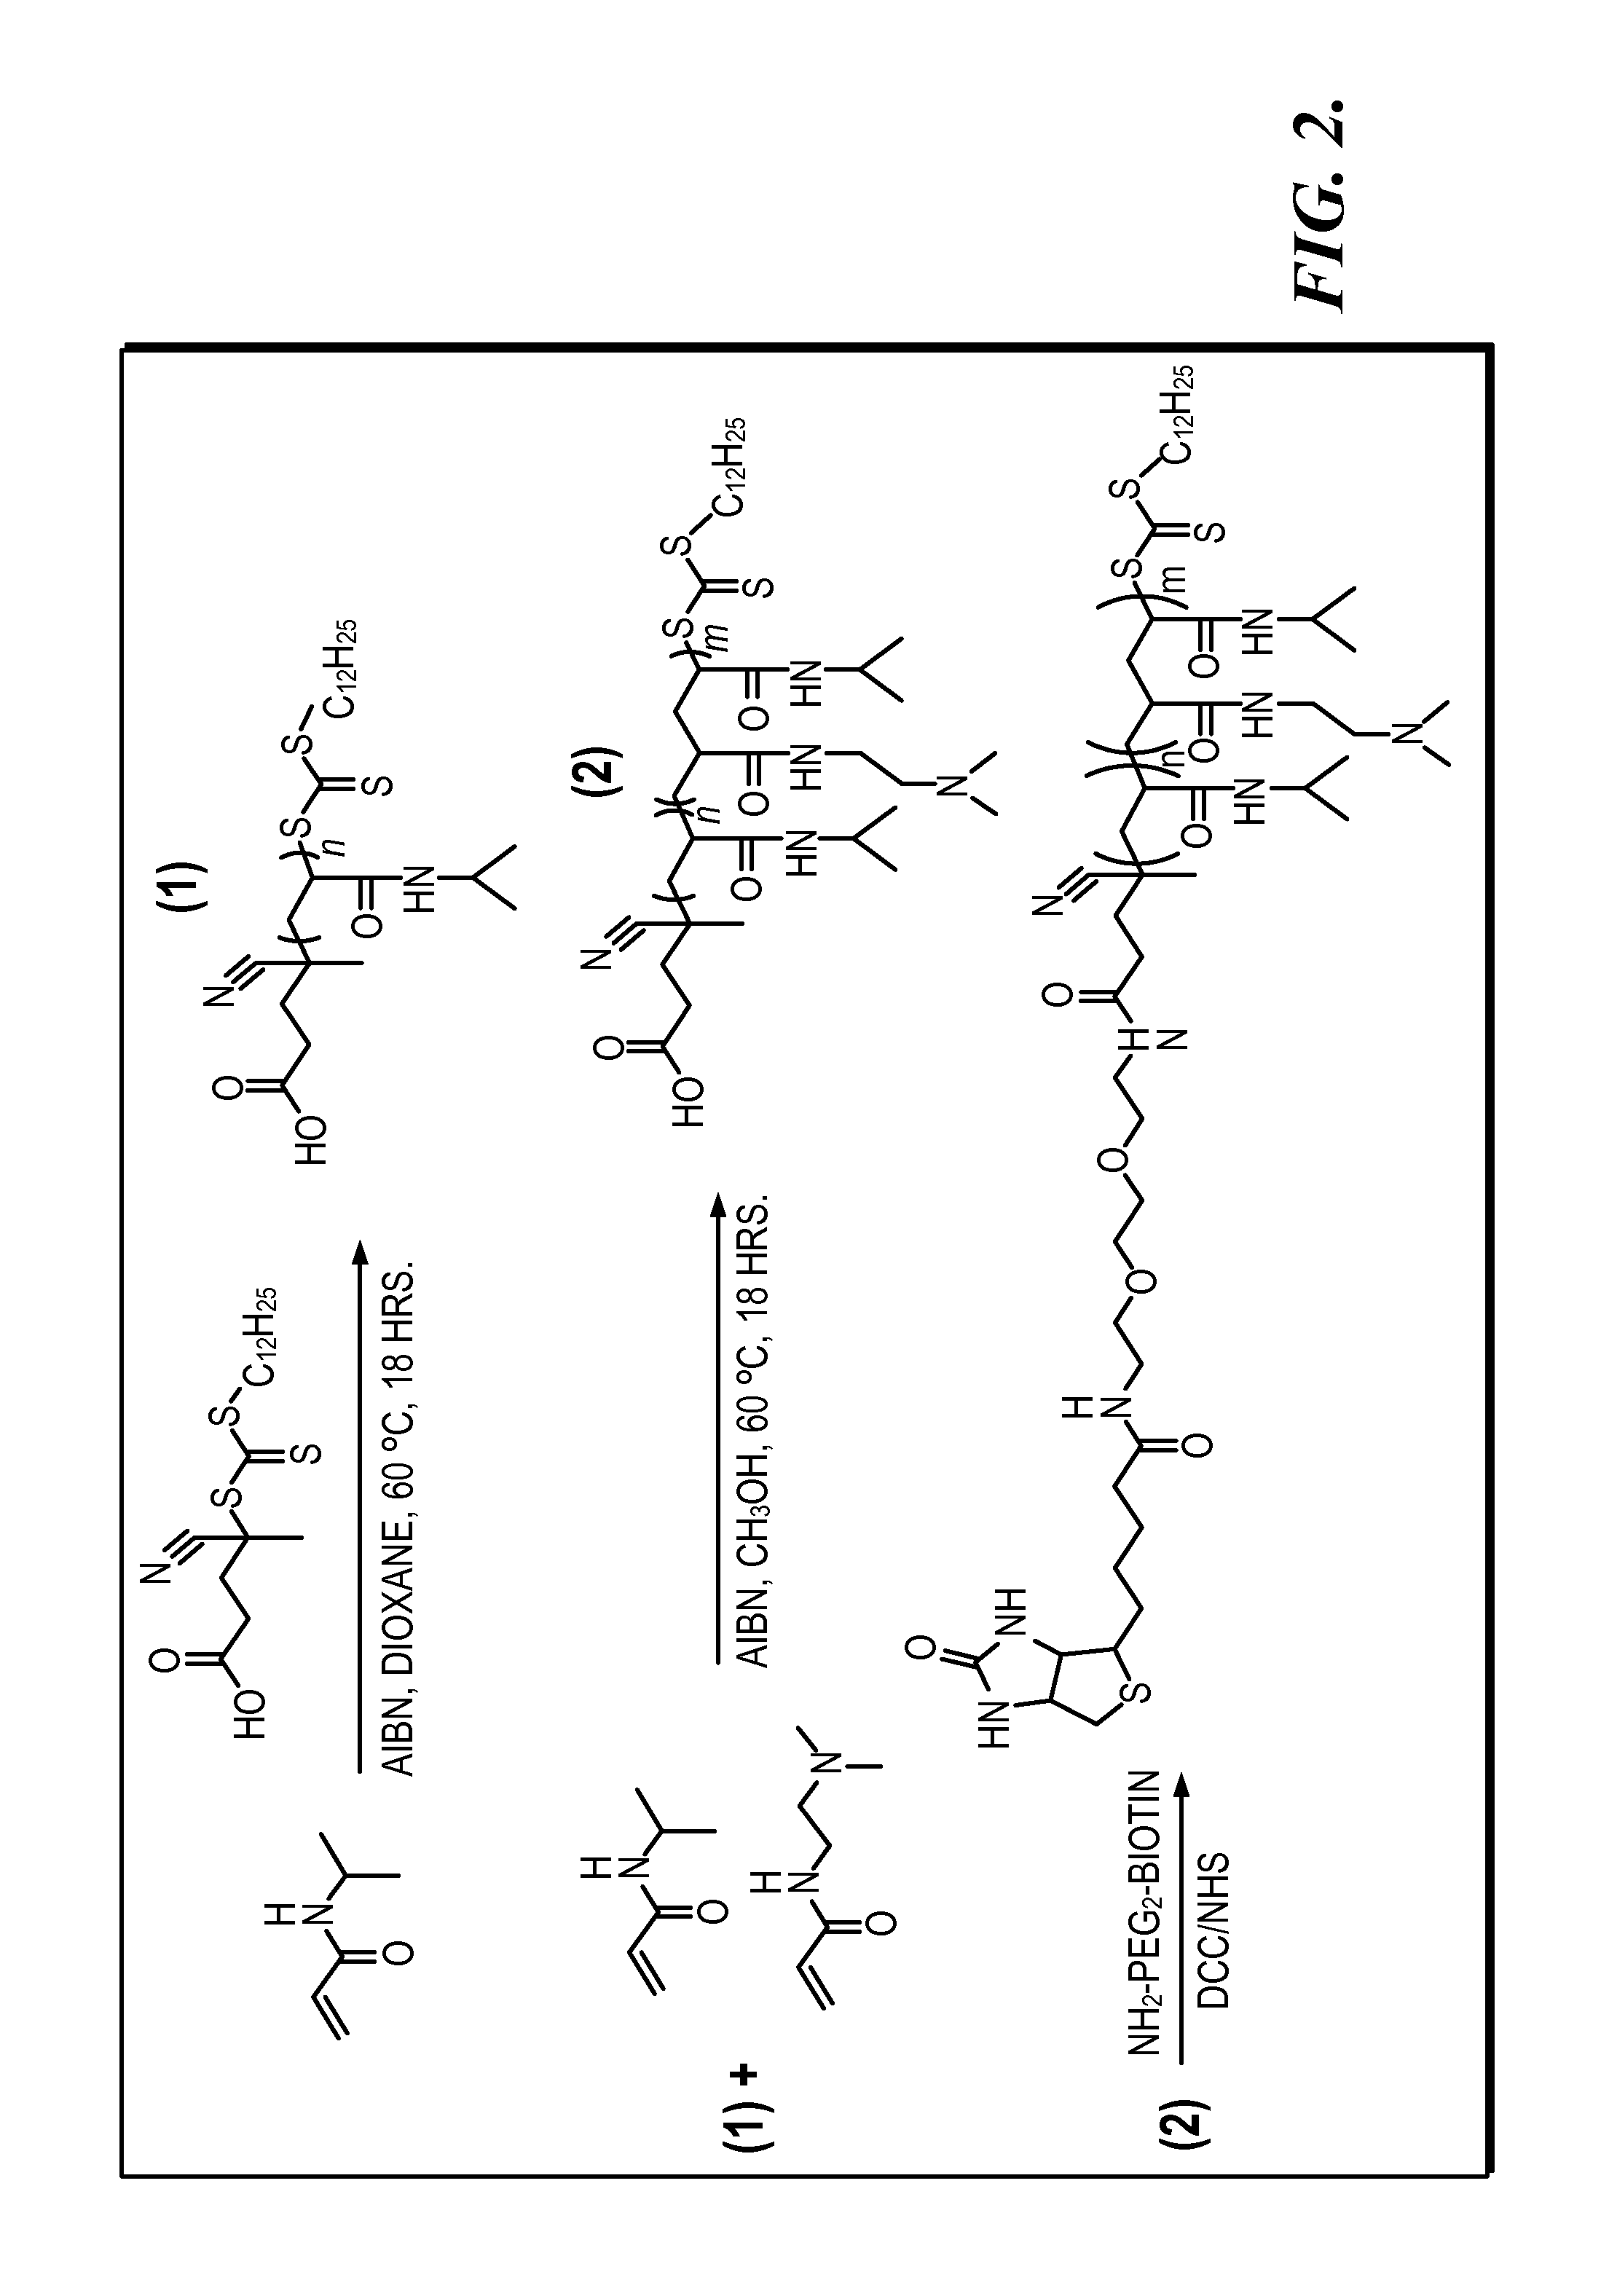 System and Method for Magnetically Concentrating and Detecting Biomarkers